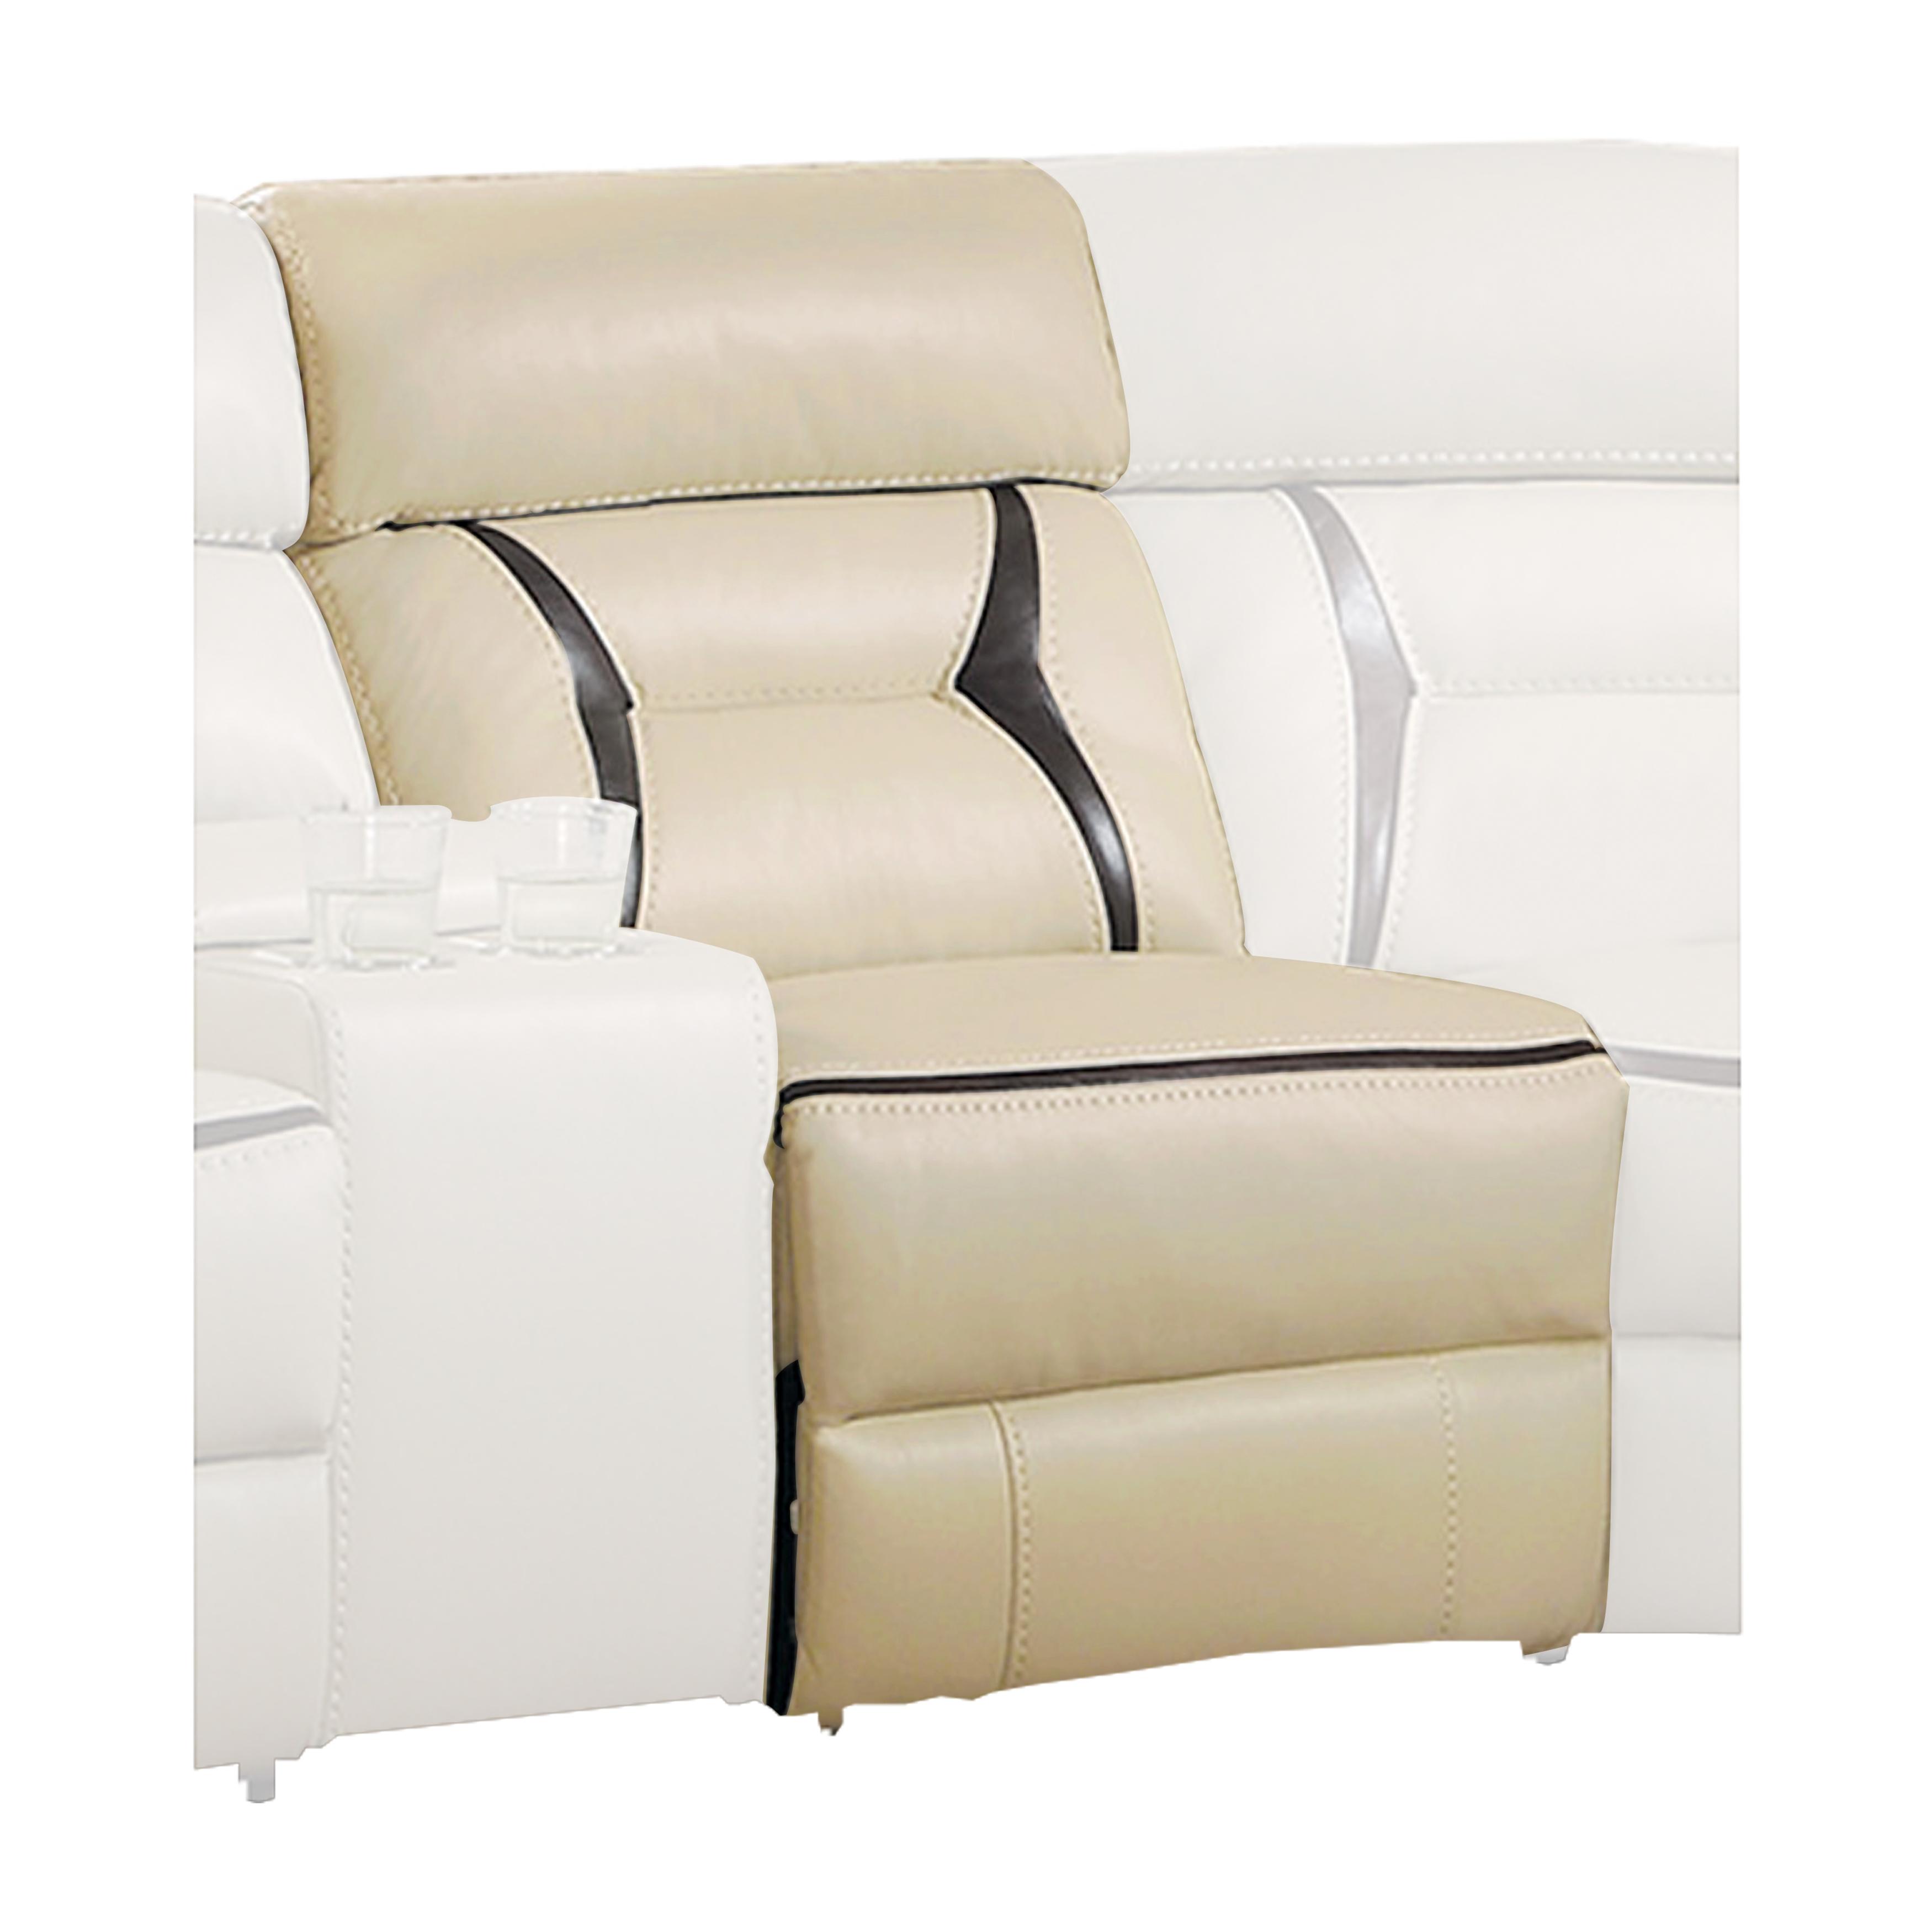 Modern Armless Chair 8229-AC Amite 8229-AC in Beige Faux Leather